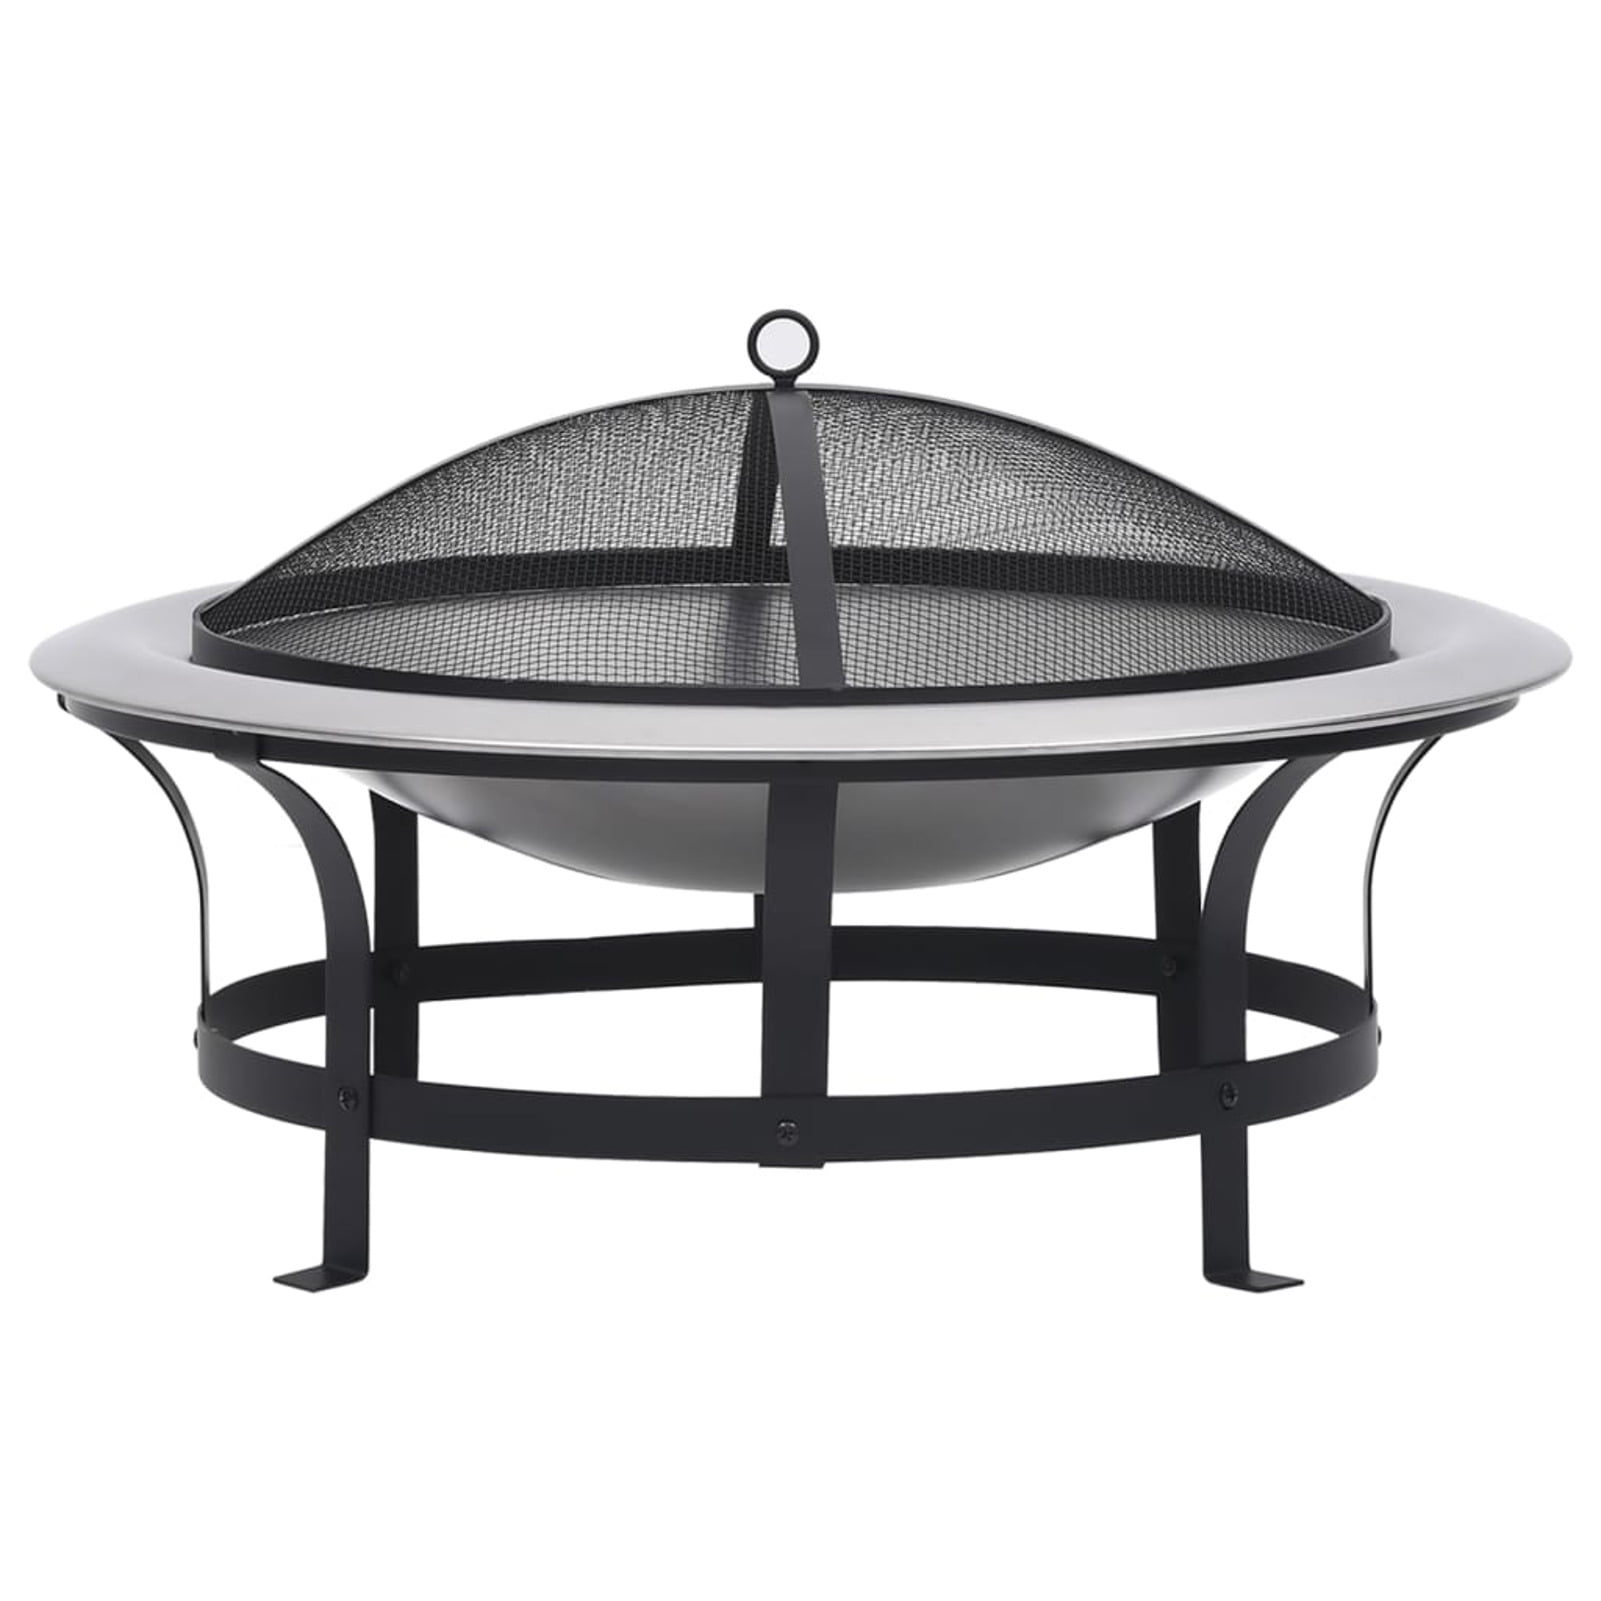 Details about   28 or 30" Outdoor Propane Fire Pit Patio Gas Camping Table Fireplace 50,000BTU 